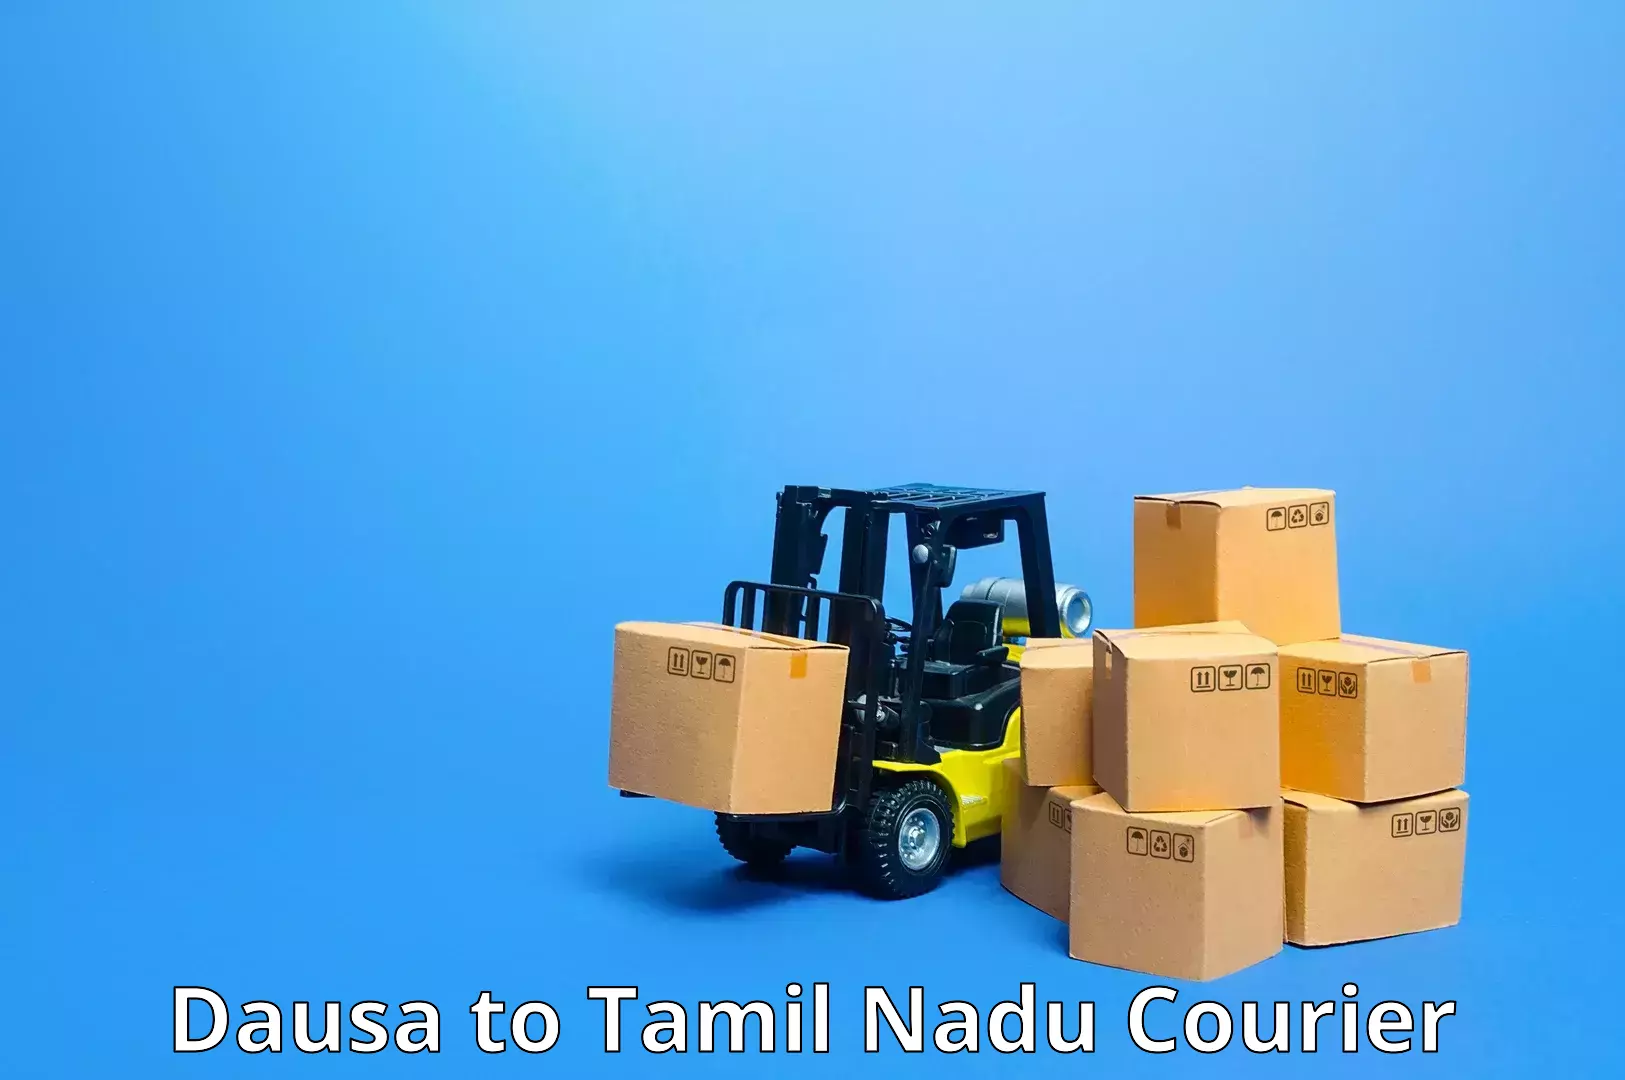 24-hour courier service Dausa to Ennore Port Chennai